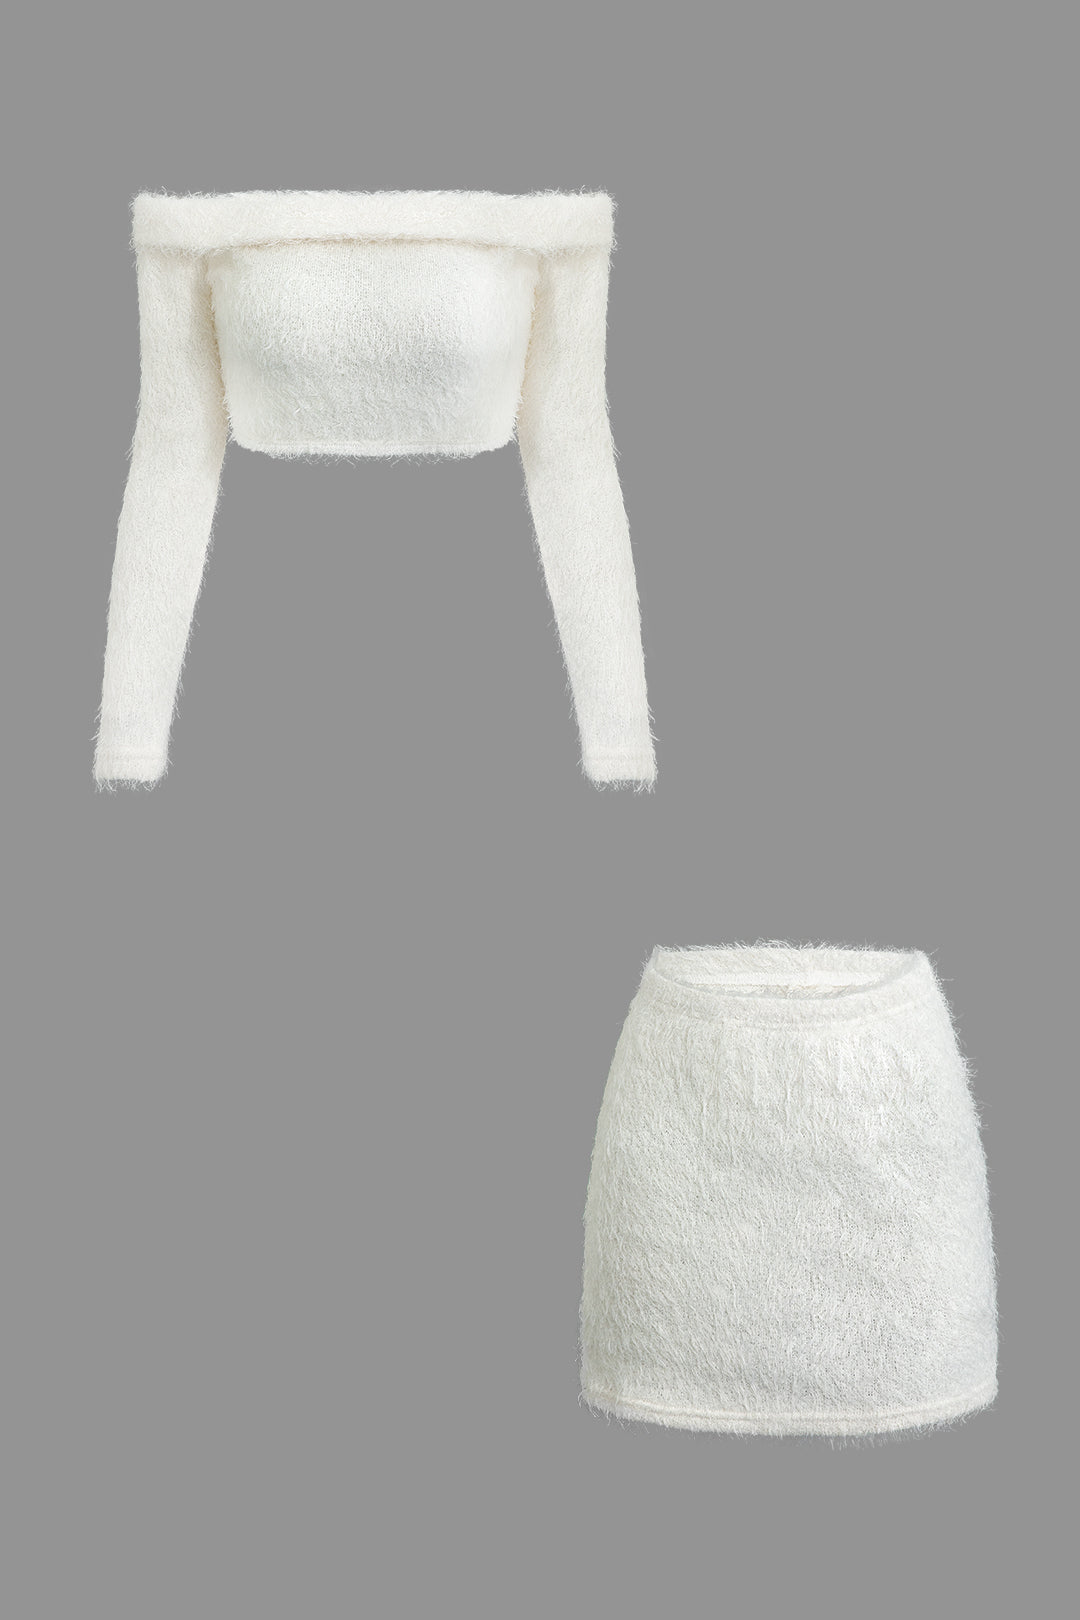 Fluffy Solid Off The Shoulder Crop Top And Mini Skirt Set